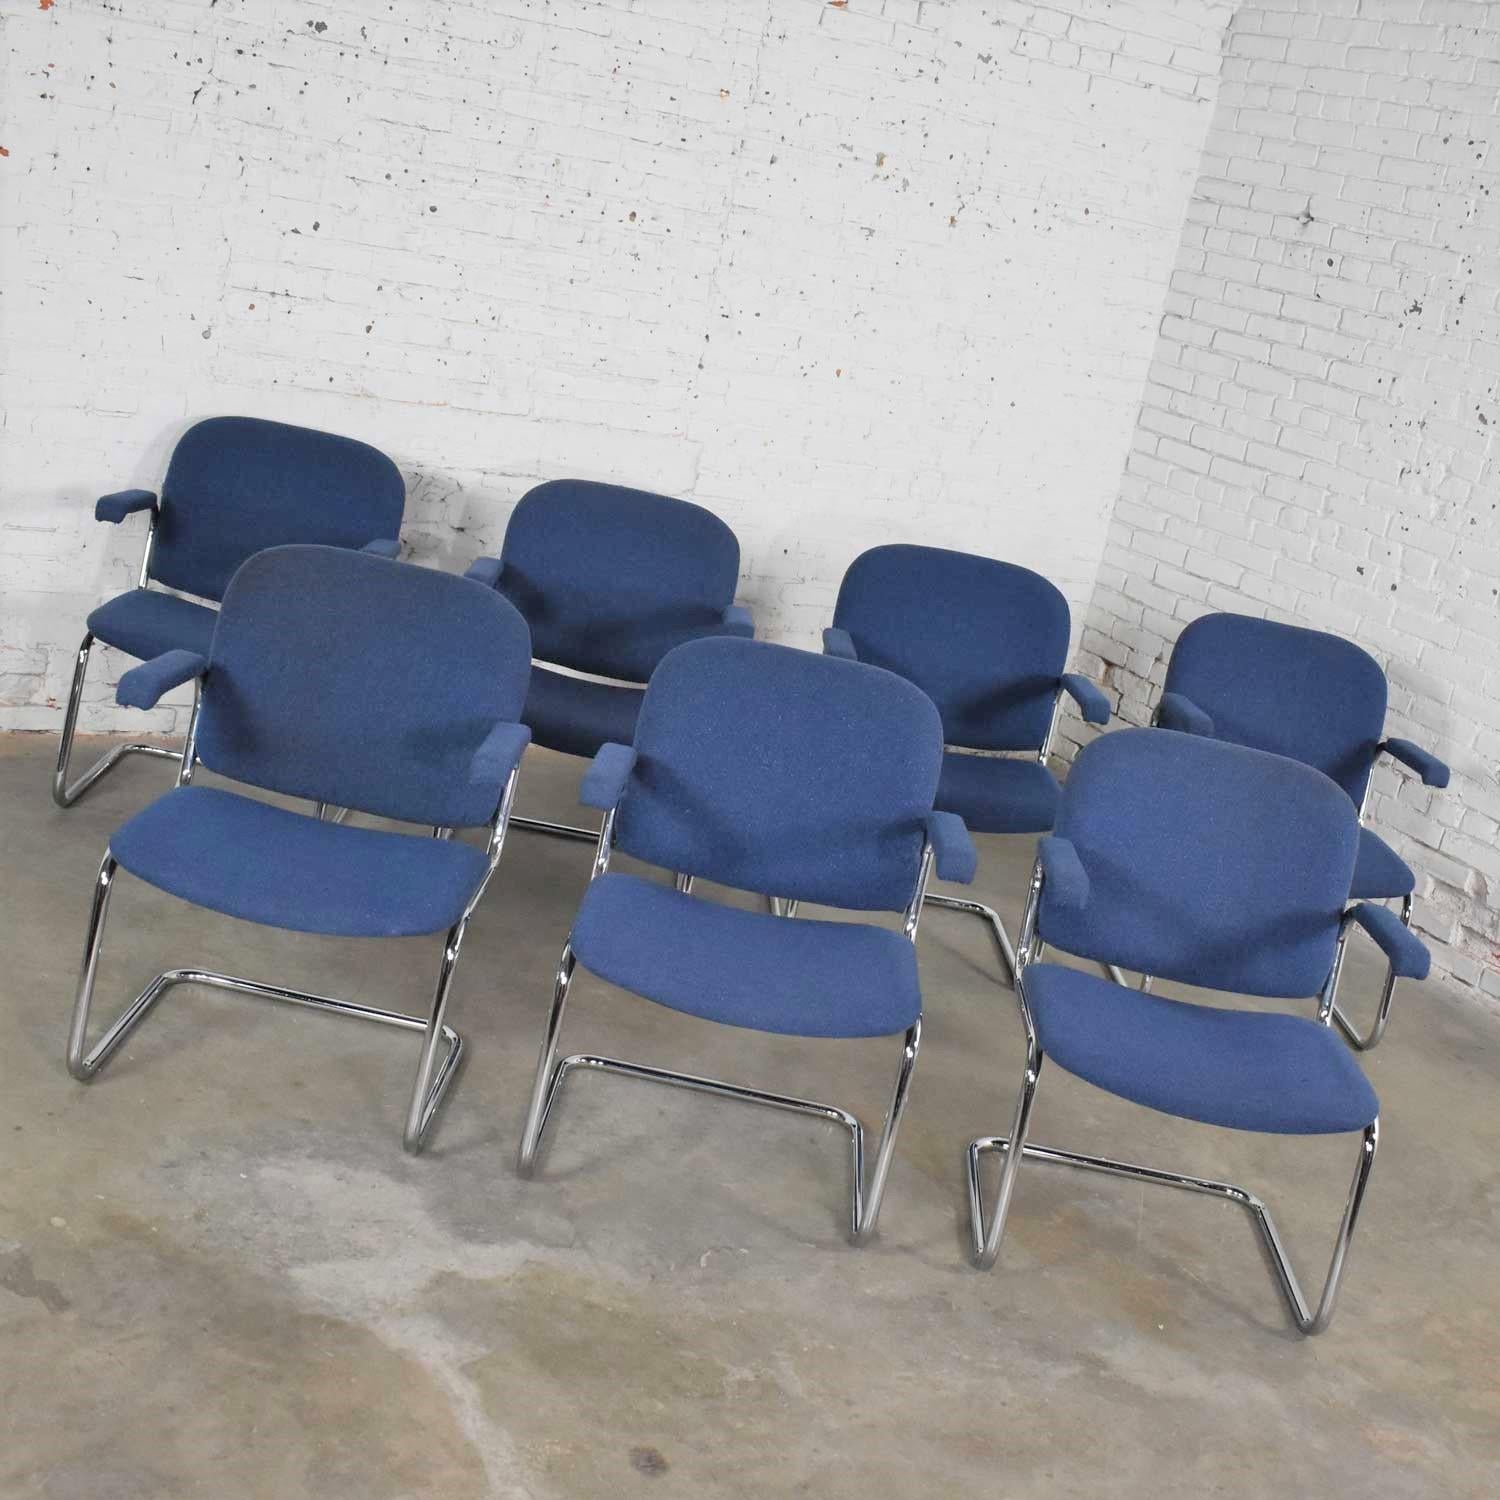 Tubular Chrome and Blue Fabric Cantilever Lounge Chair with Arms Set of 7 For Sale 4